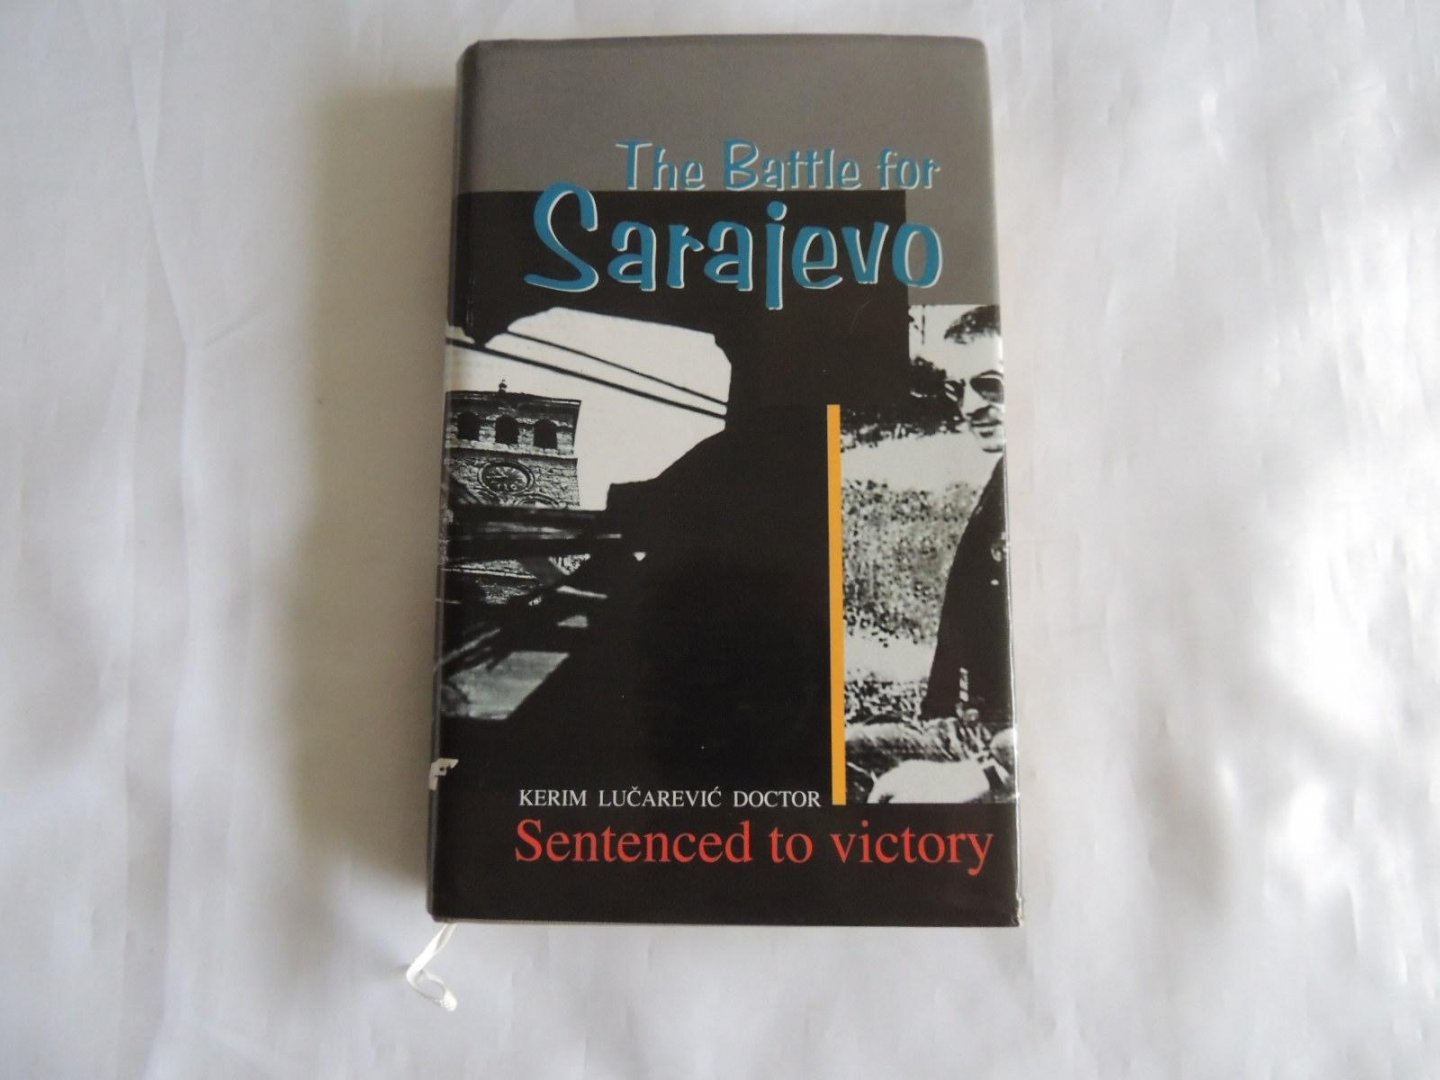 Lucarevic-Doctor, Kerim - The Battle for Sarajevo - Sentenced to Victory